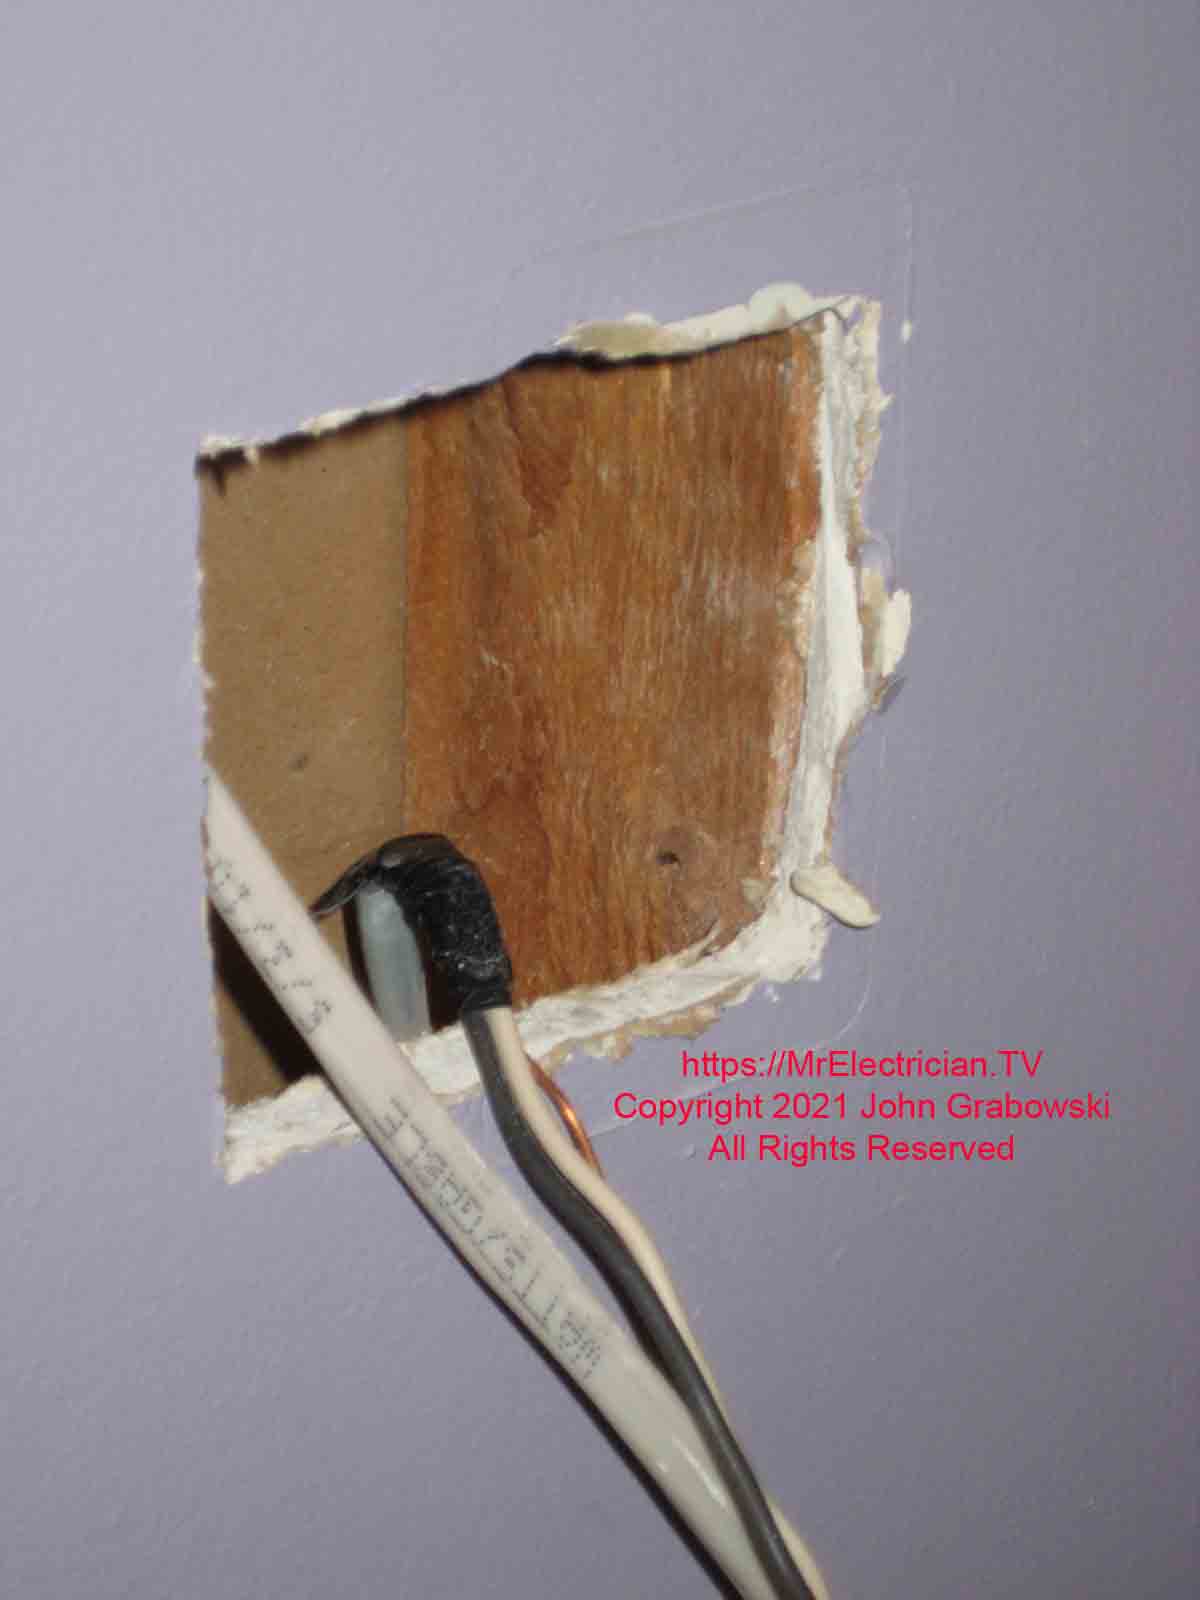 Newly enlarged hole with wires protruding for a two gang old work electrical switch box